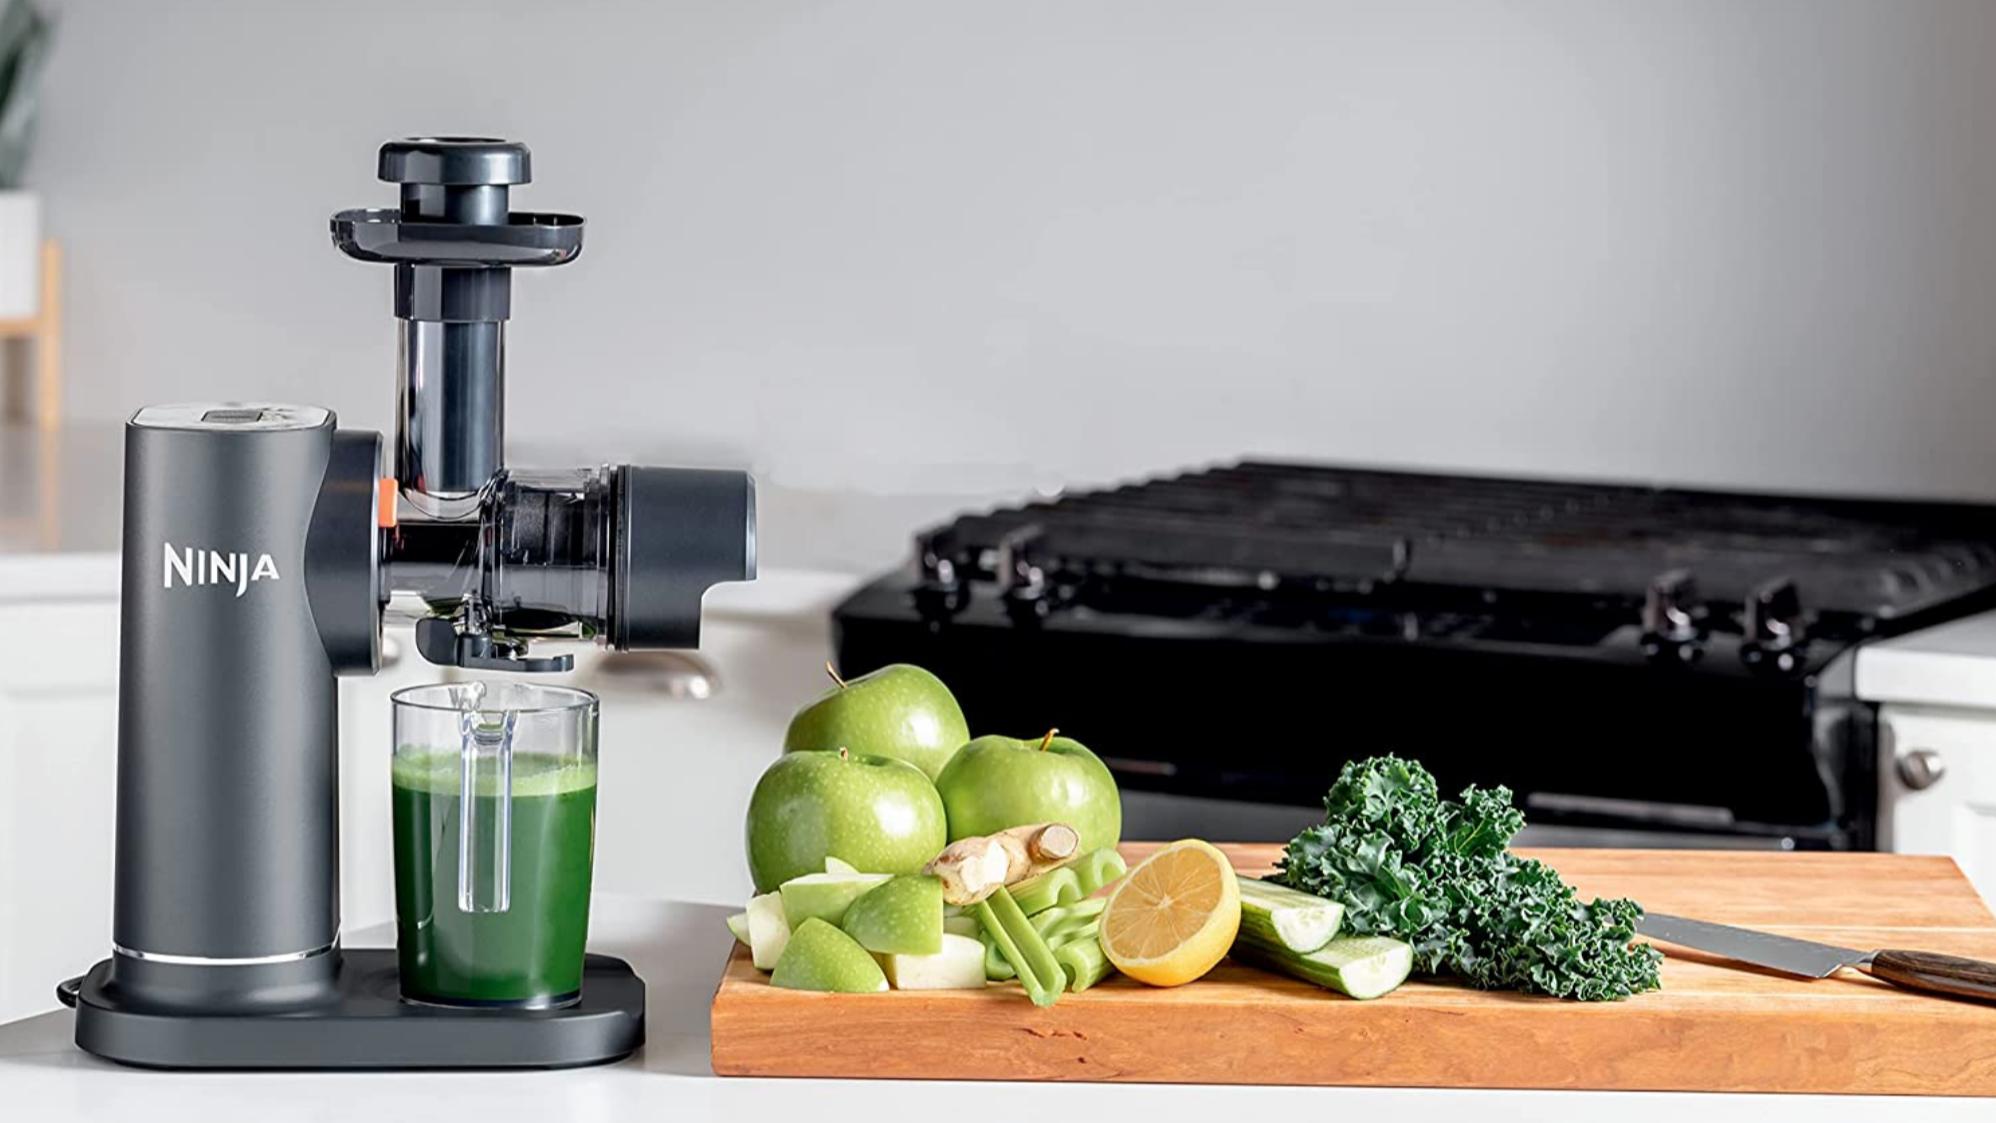 ninja neverclog cold press juicer to the left. green apple, orange, kale, and cucumber to the right.